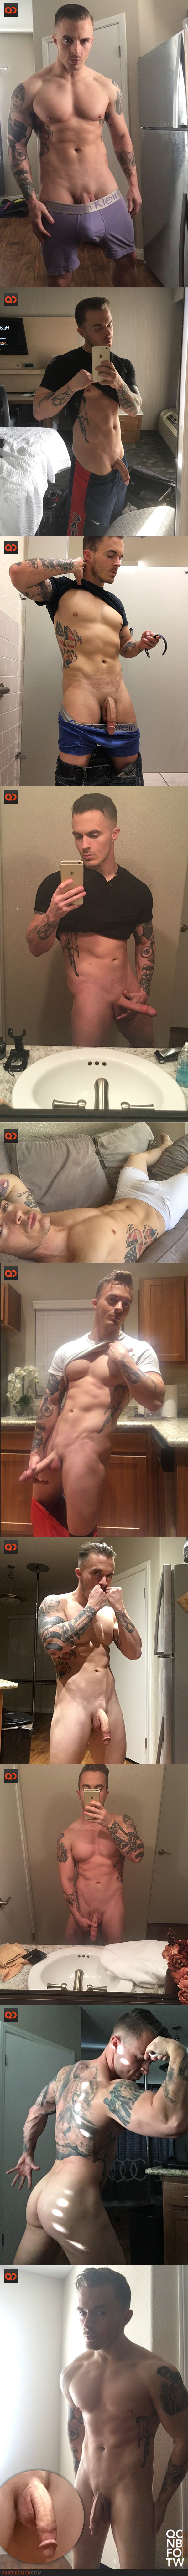 nude_bf_of_the_week-ex_military_man-collage02